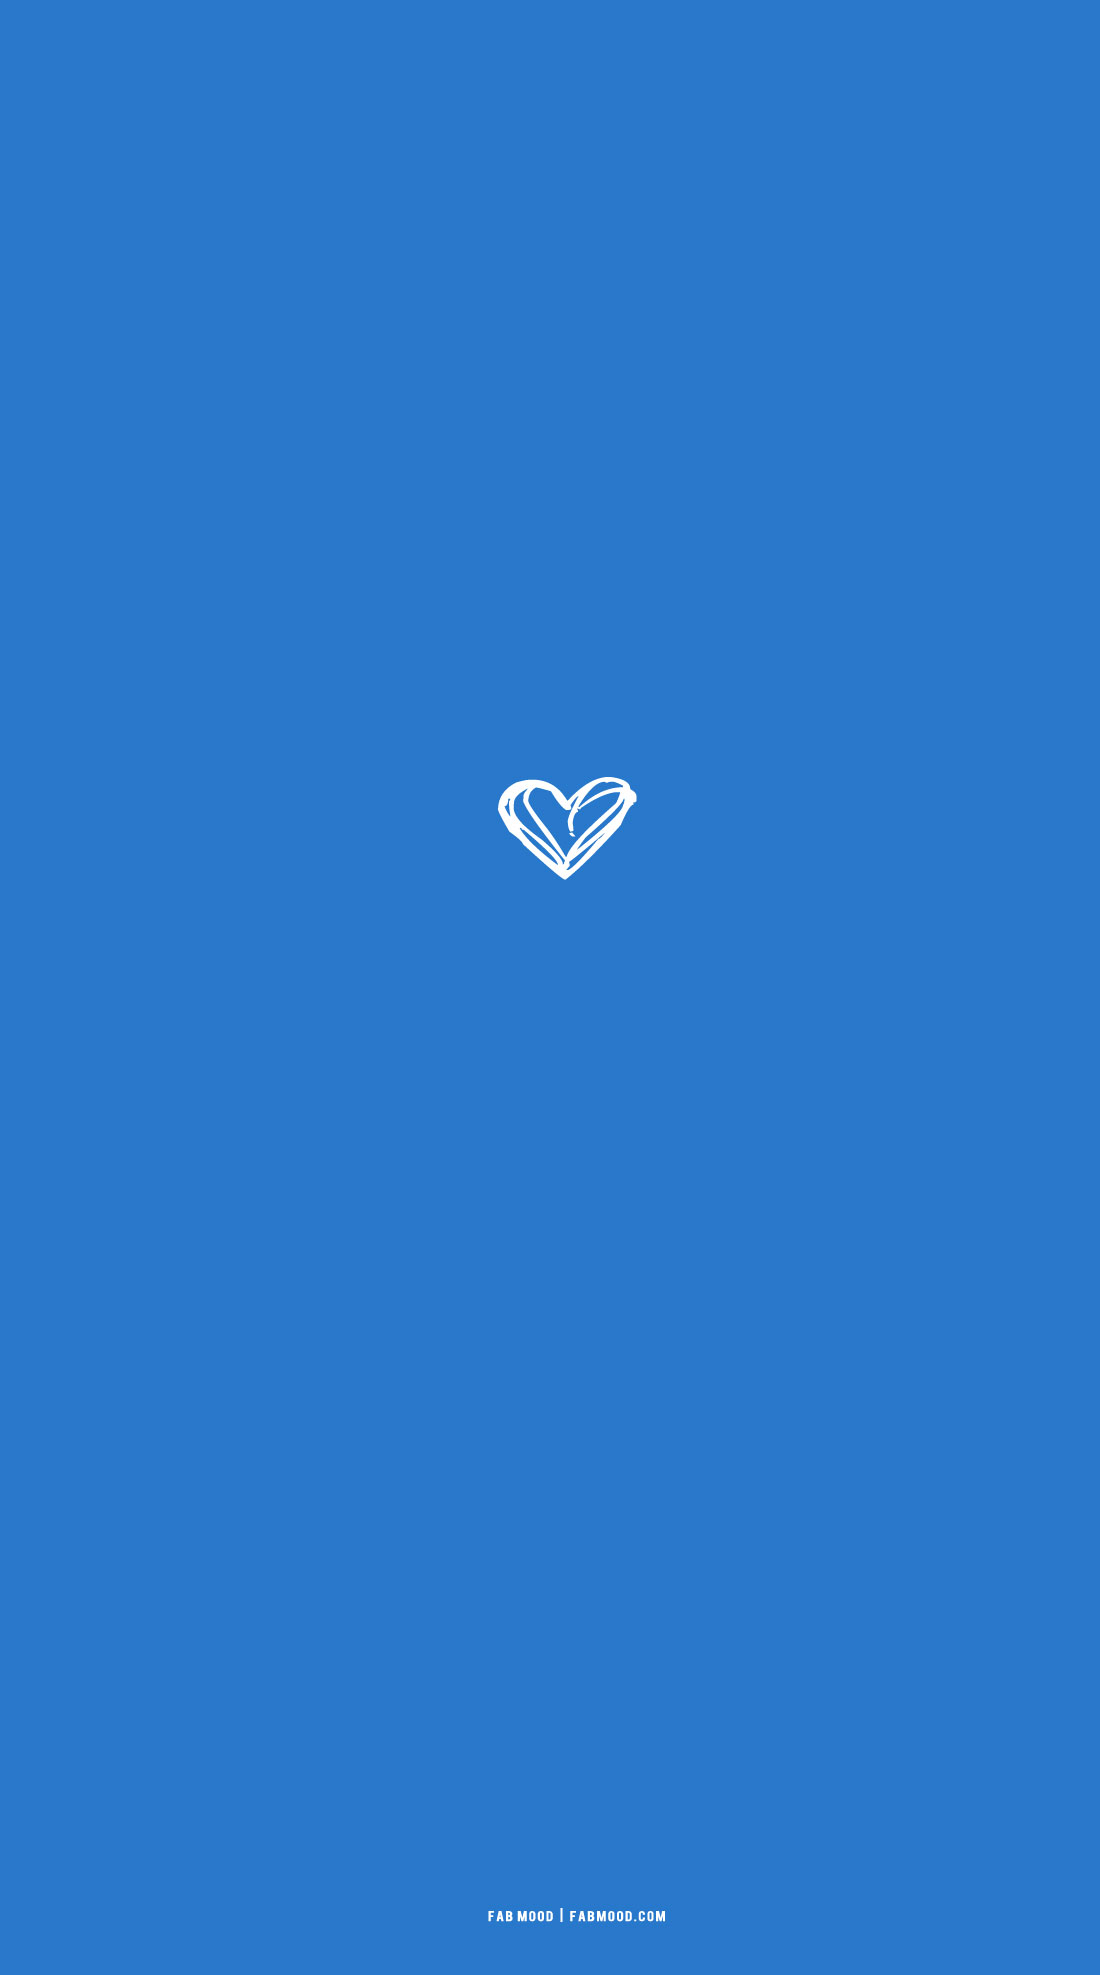 15 Azure Blue Wallpapers For Phone : Messy Heart Illustration